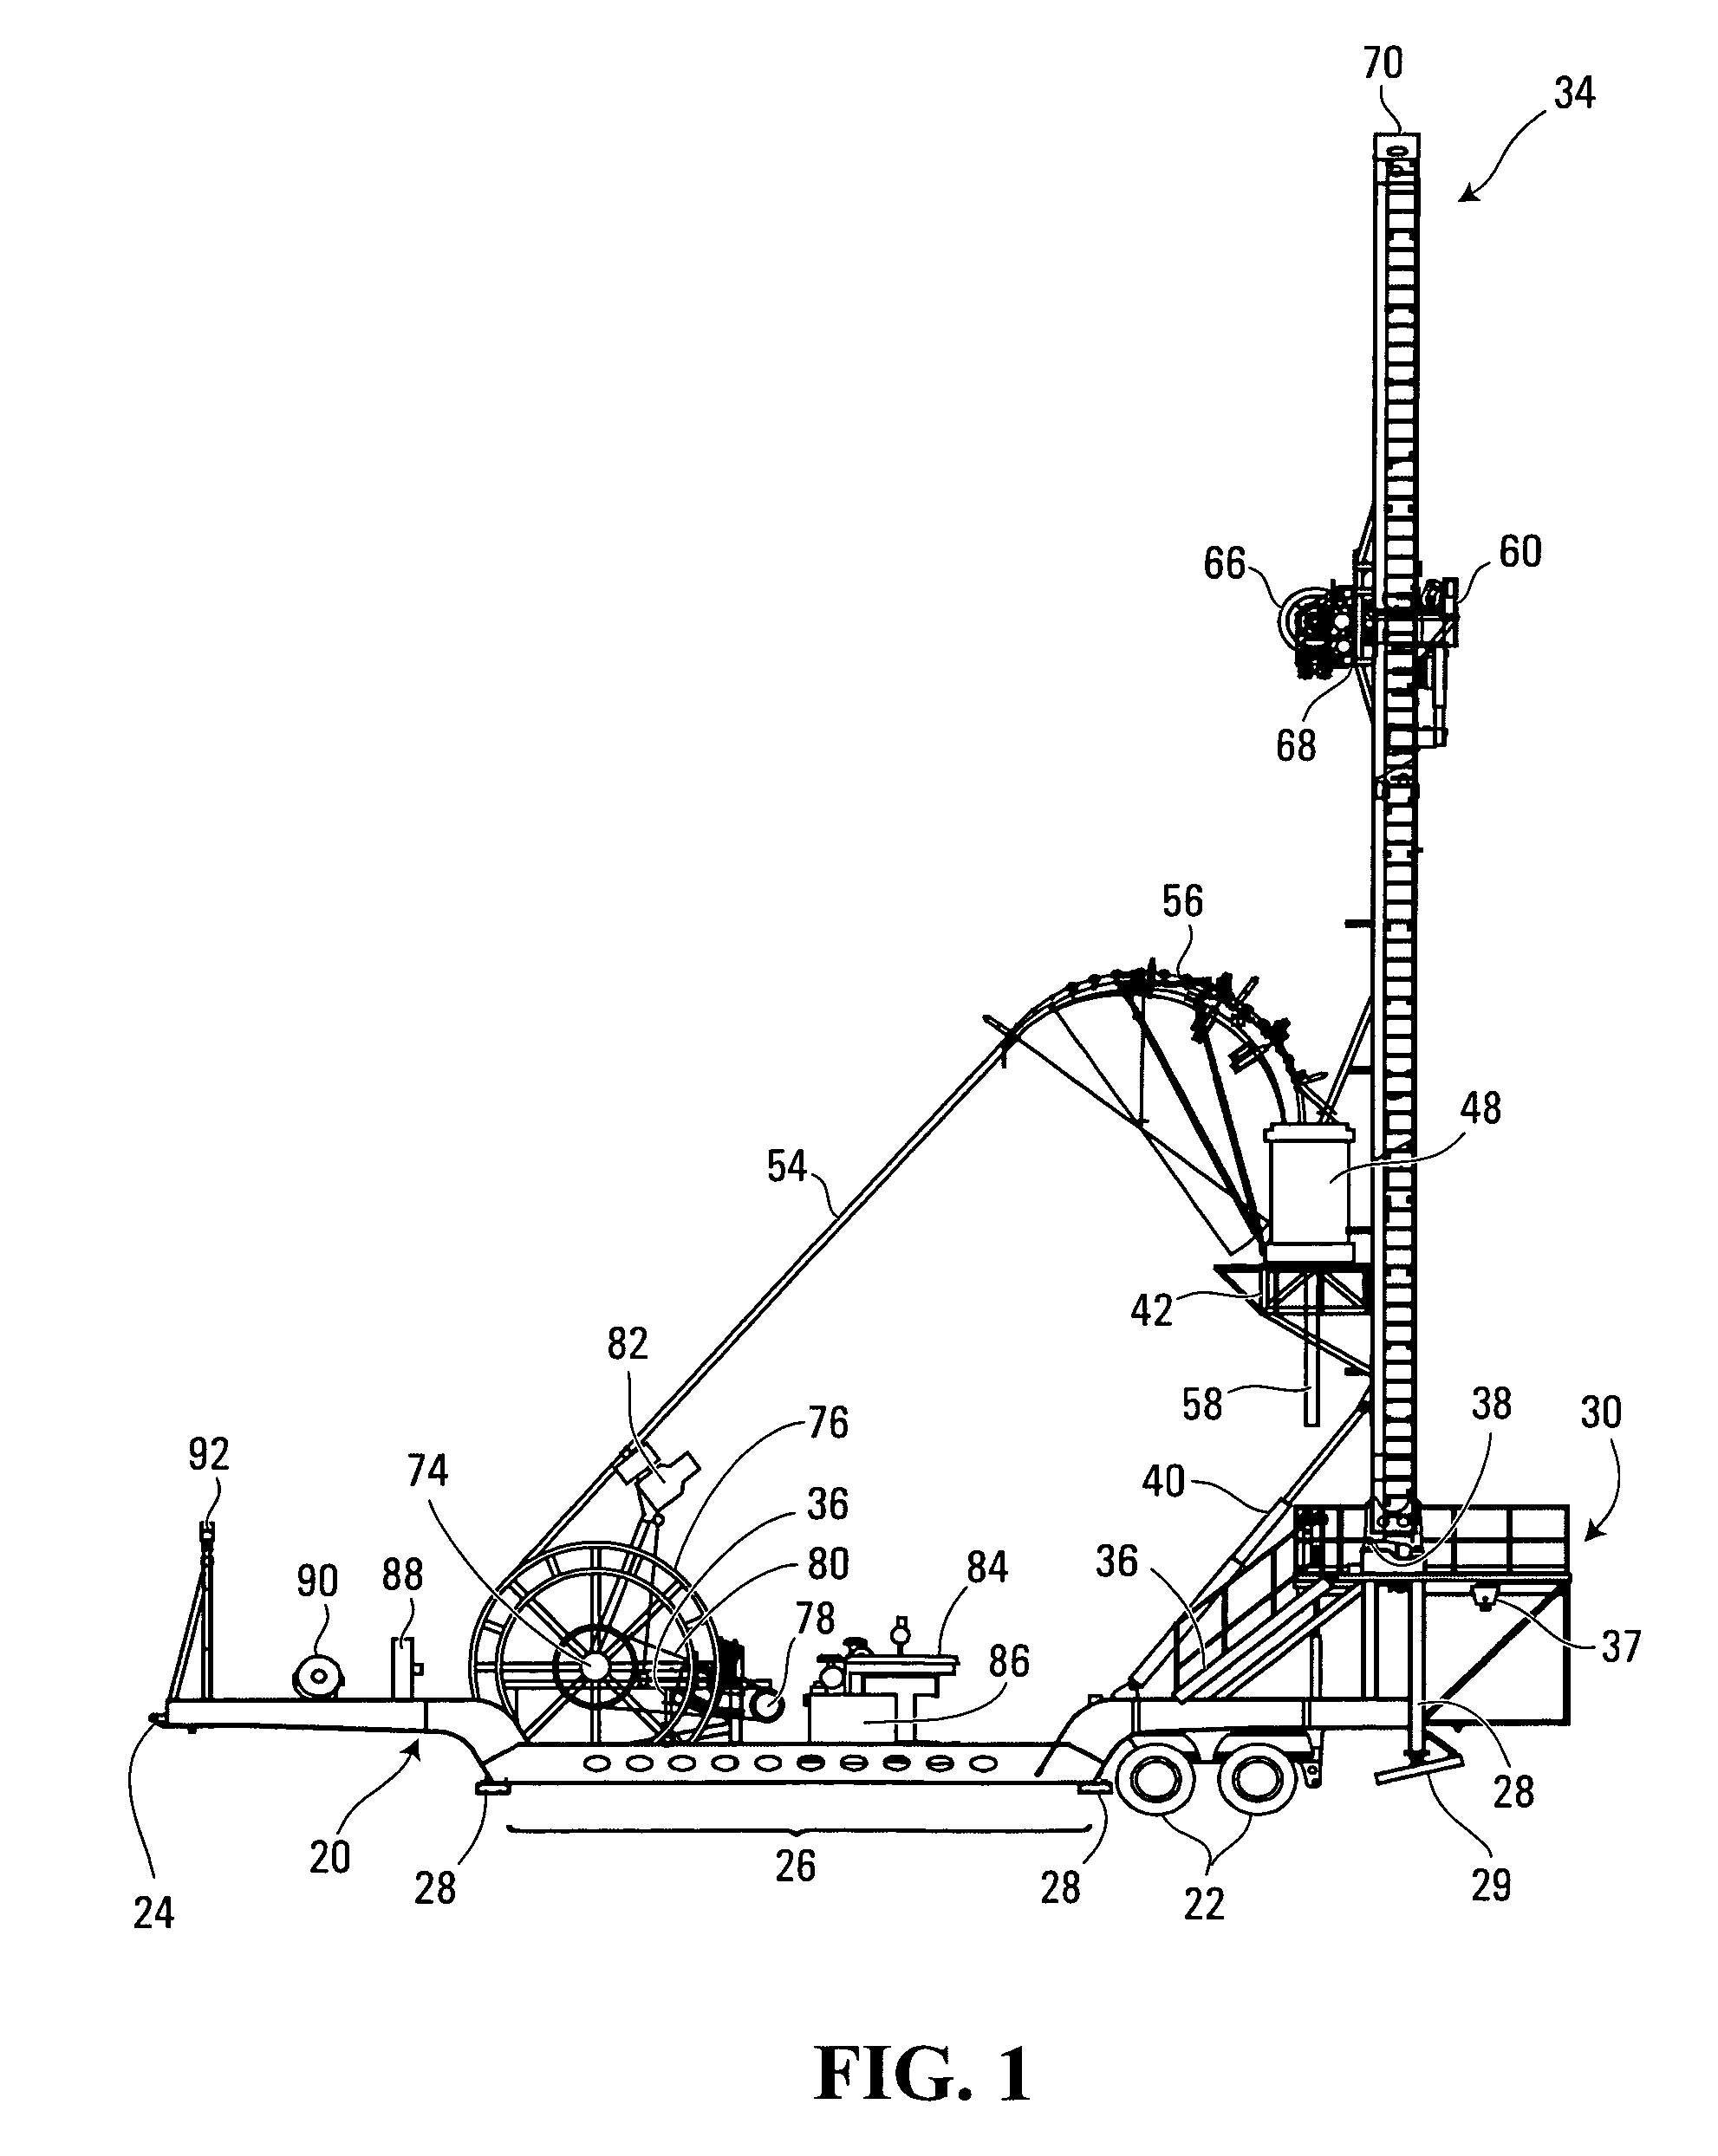 Drilling rig apparatus and downhole tool assembly system and method